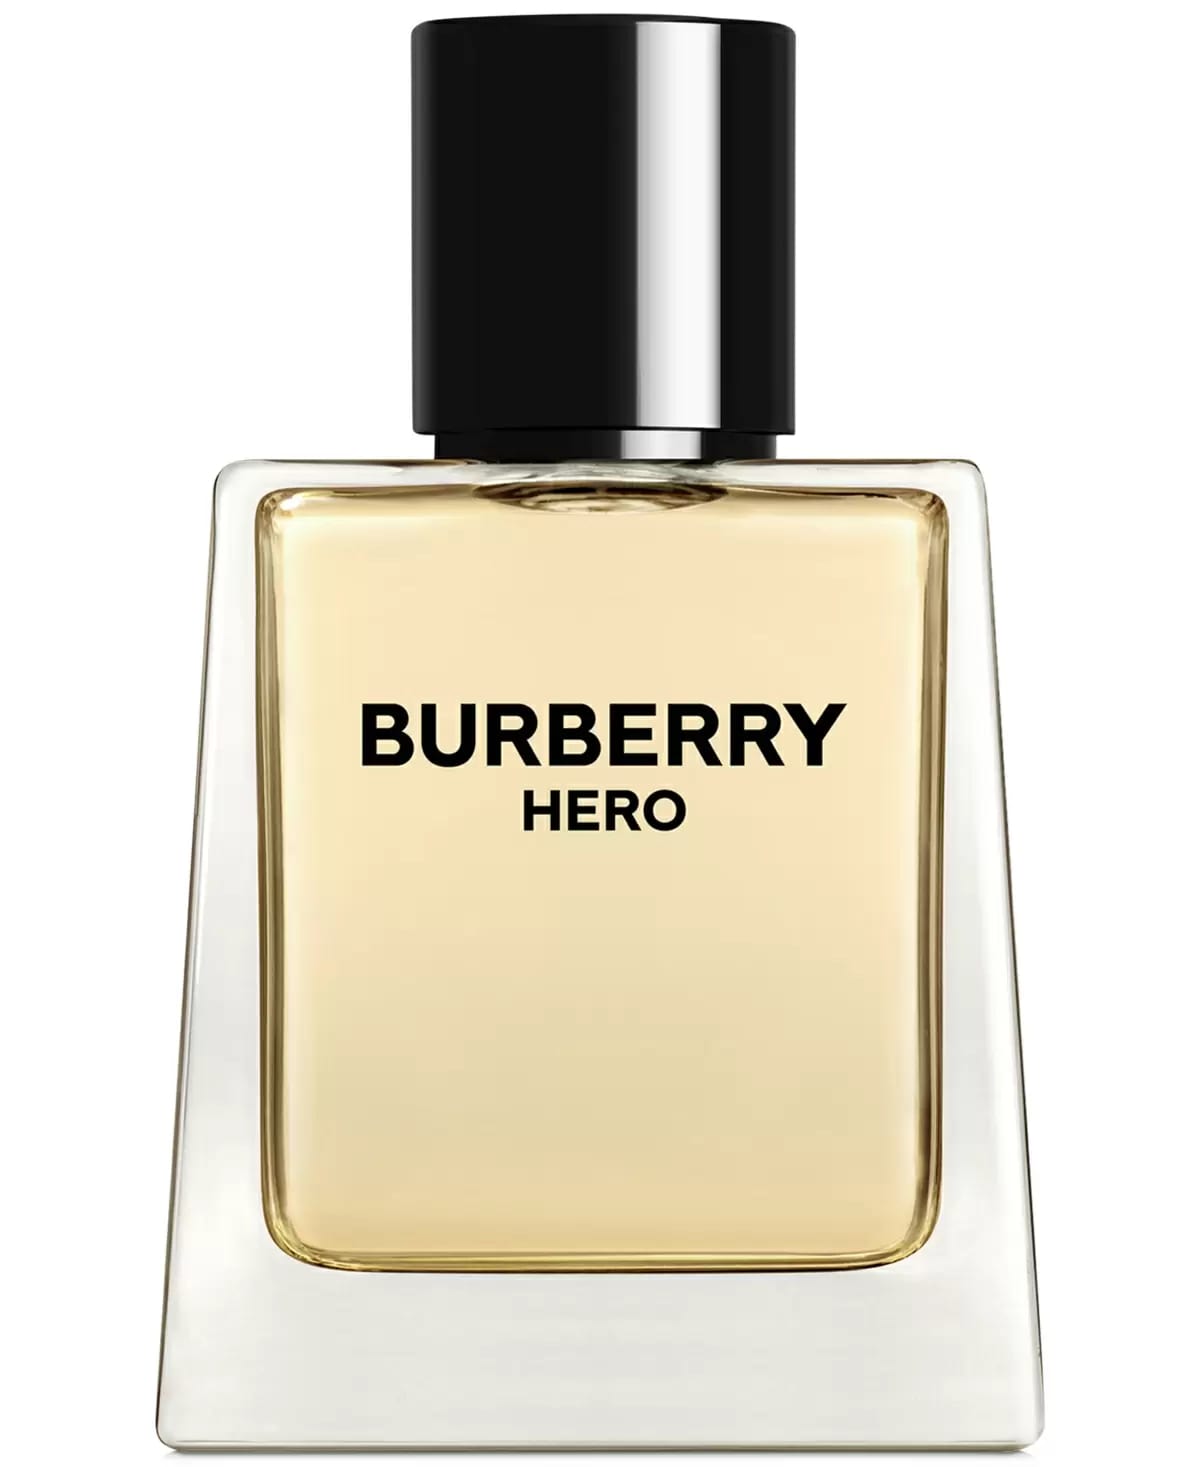 Burberry Hero EDT Perfume for Men by Burberry